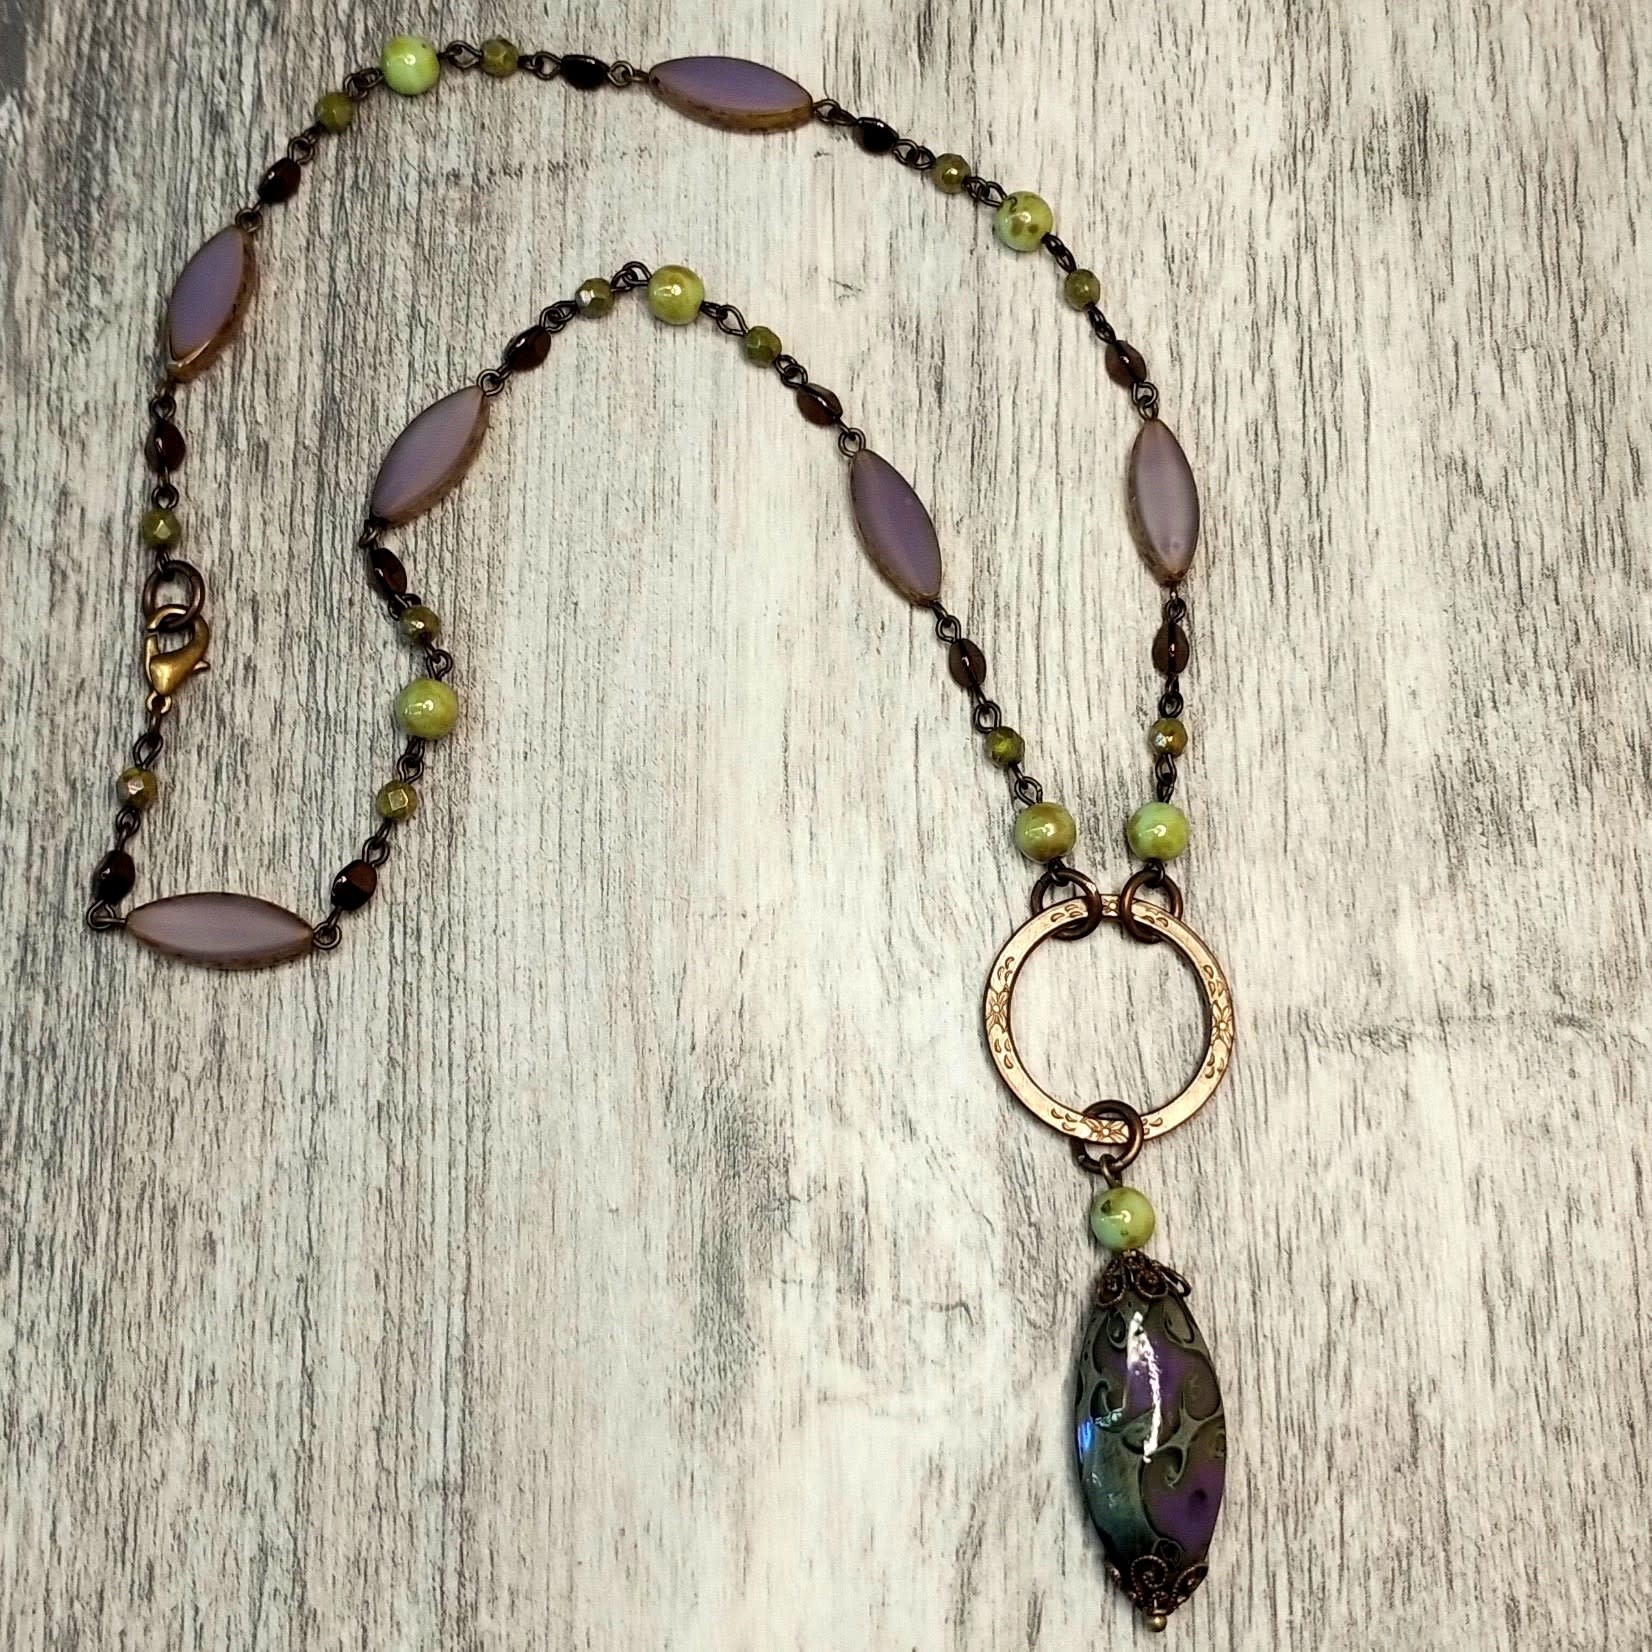 Czech Glass Beaded Chain Purple Spindle/Green - 1 foot